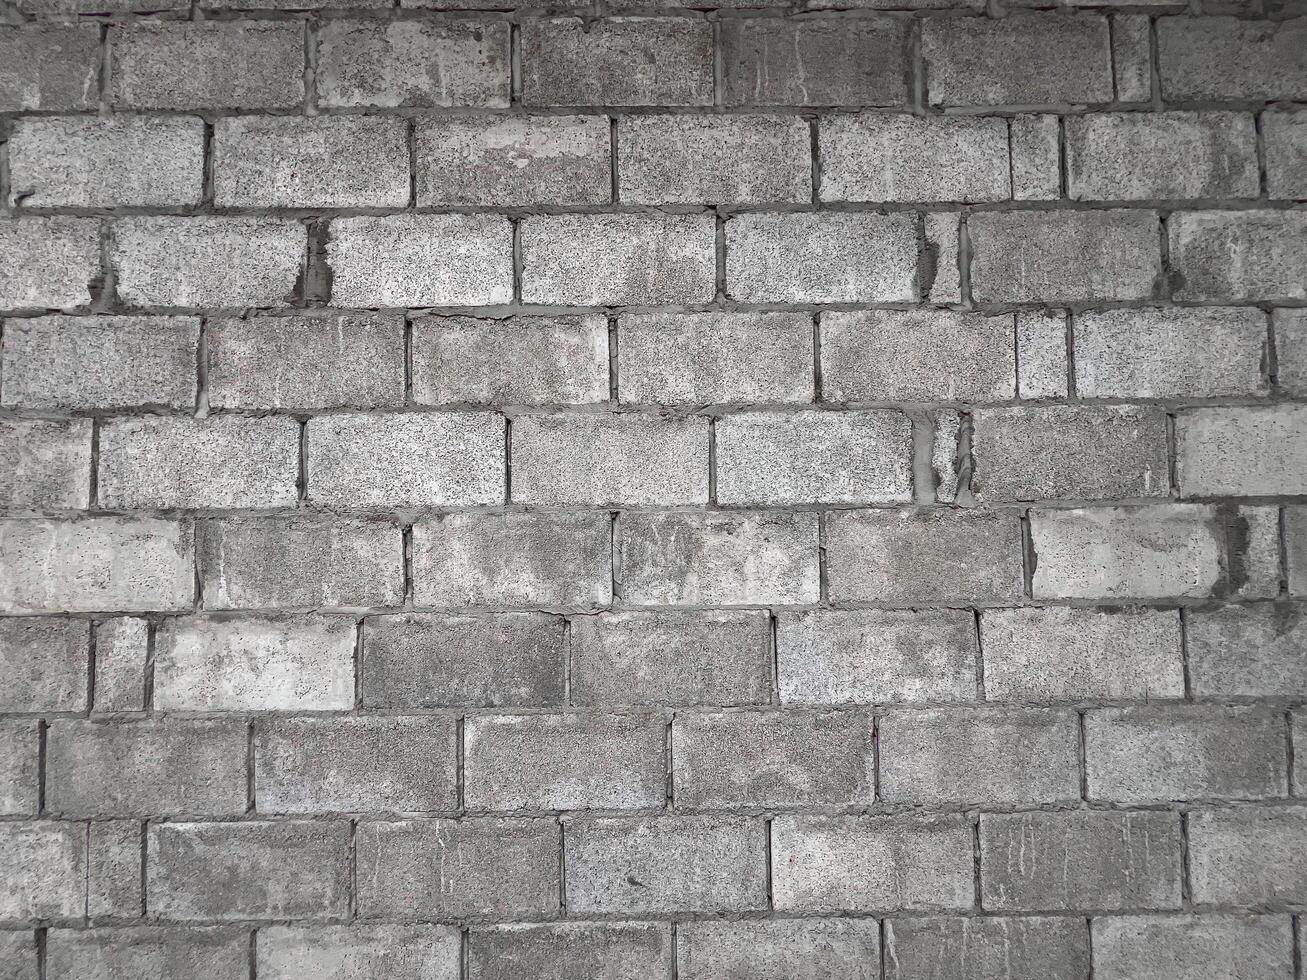 Black and white abstract brick pattern, design, old, brick wall photo